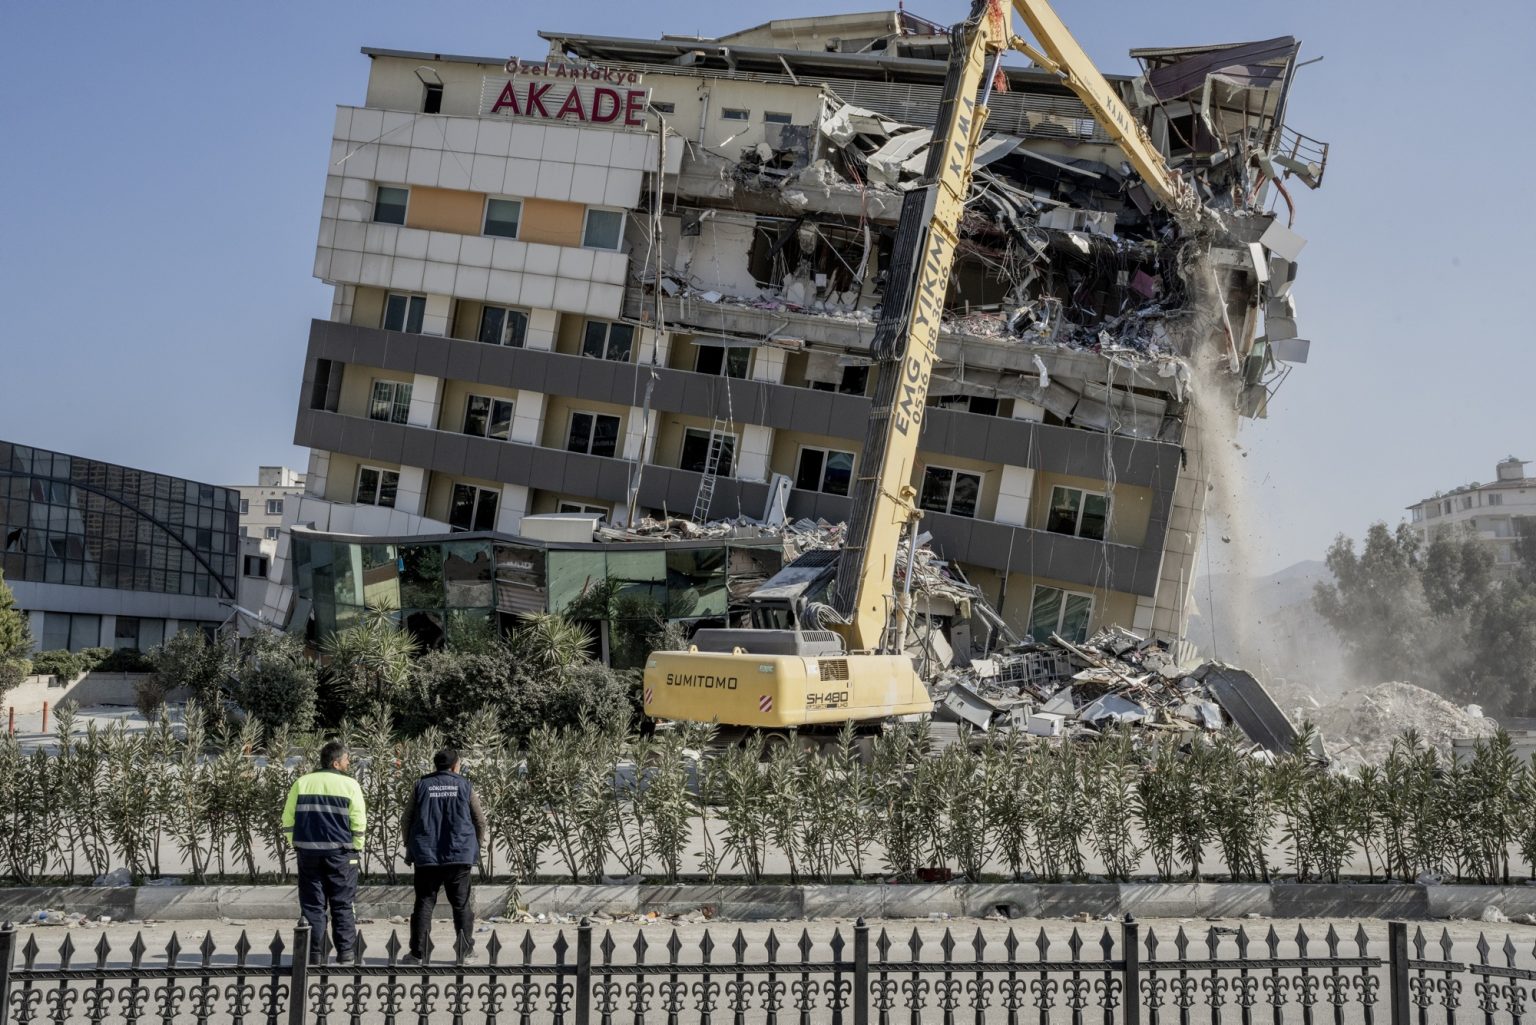 Antakya, Turkey, February 2023 - The aftermath of the earthquake that hit southern Turkey and northern Syria. The earthquake-damaged academy hospital of the city of Antakya is torn down by authorities. ><
Antakya, Turchia, febbraio 2023  Le conseguenze del terremoto che ha colpito la Turchia del Sud e la Siria del nord.